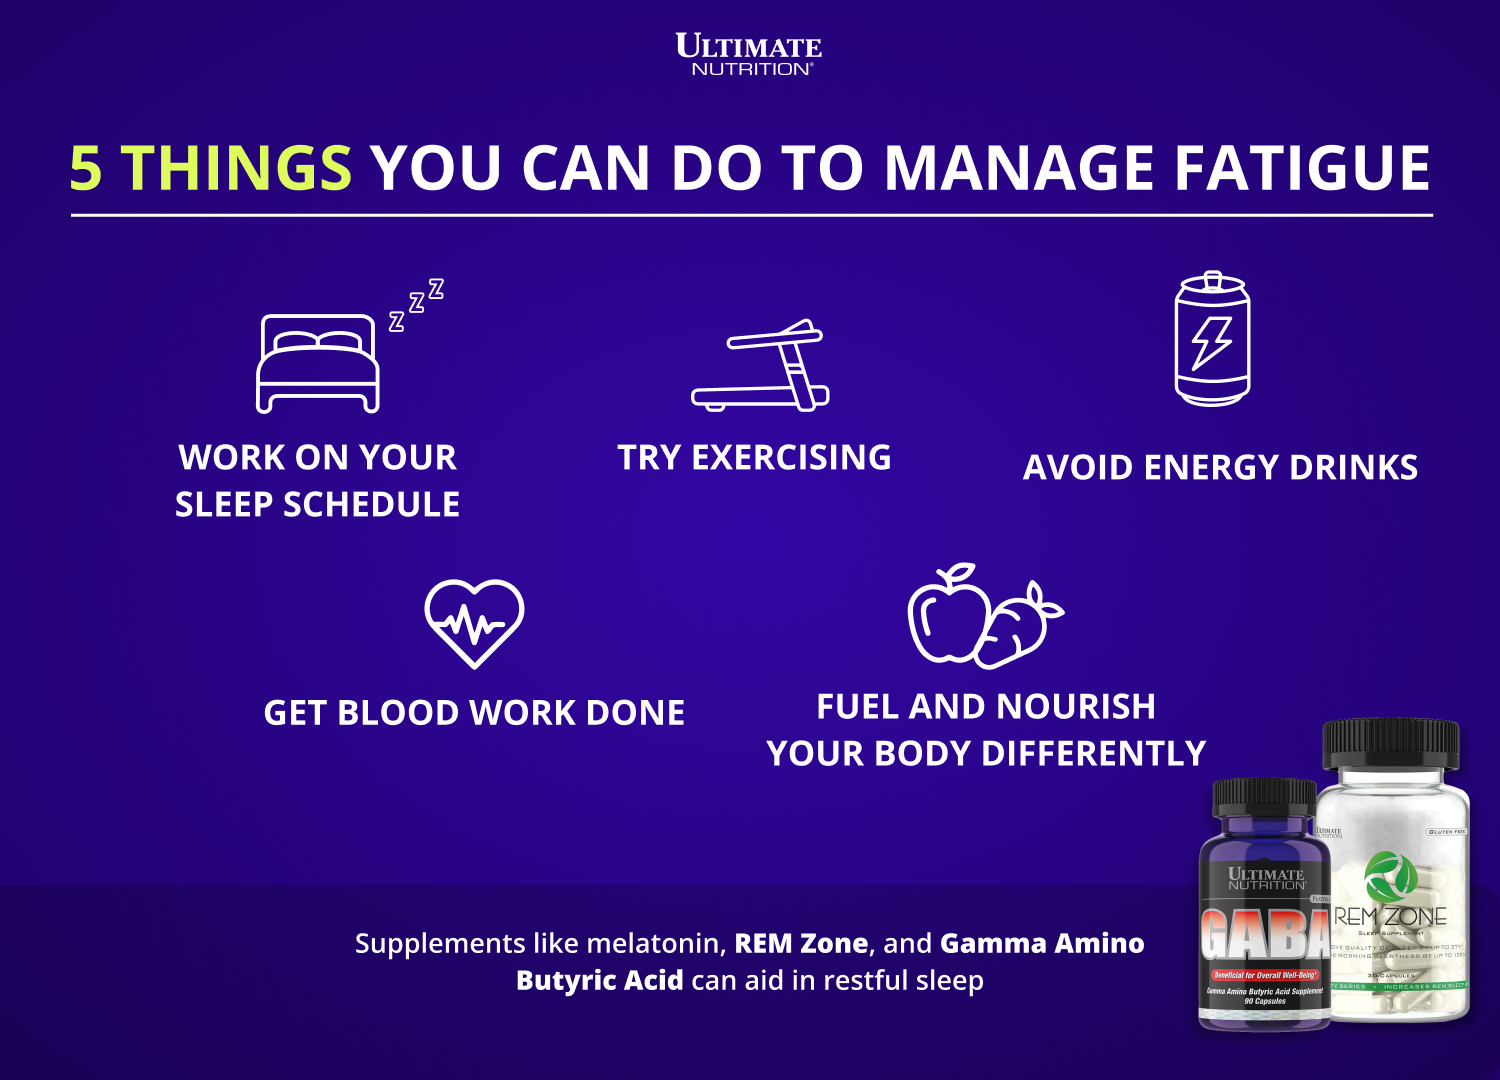 5 Things you Can Do to Manage Fatigue infographic by Ultimate Nutrition